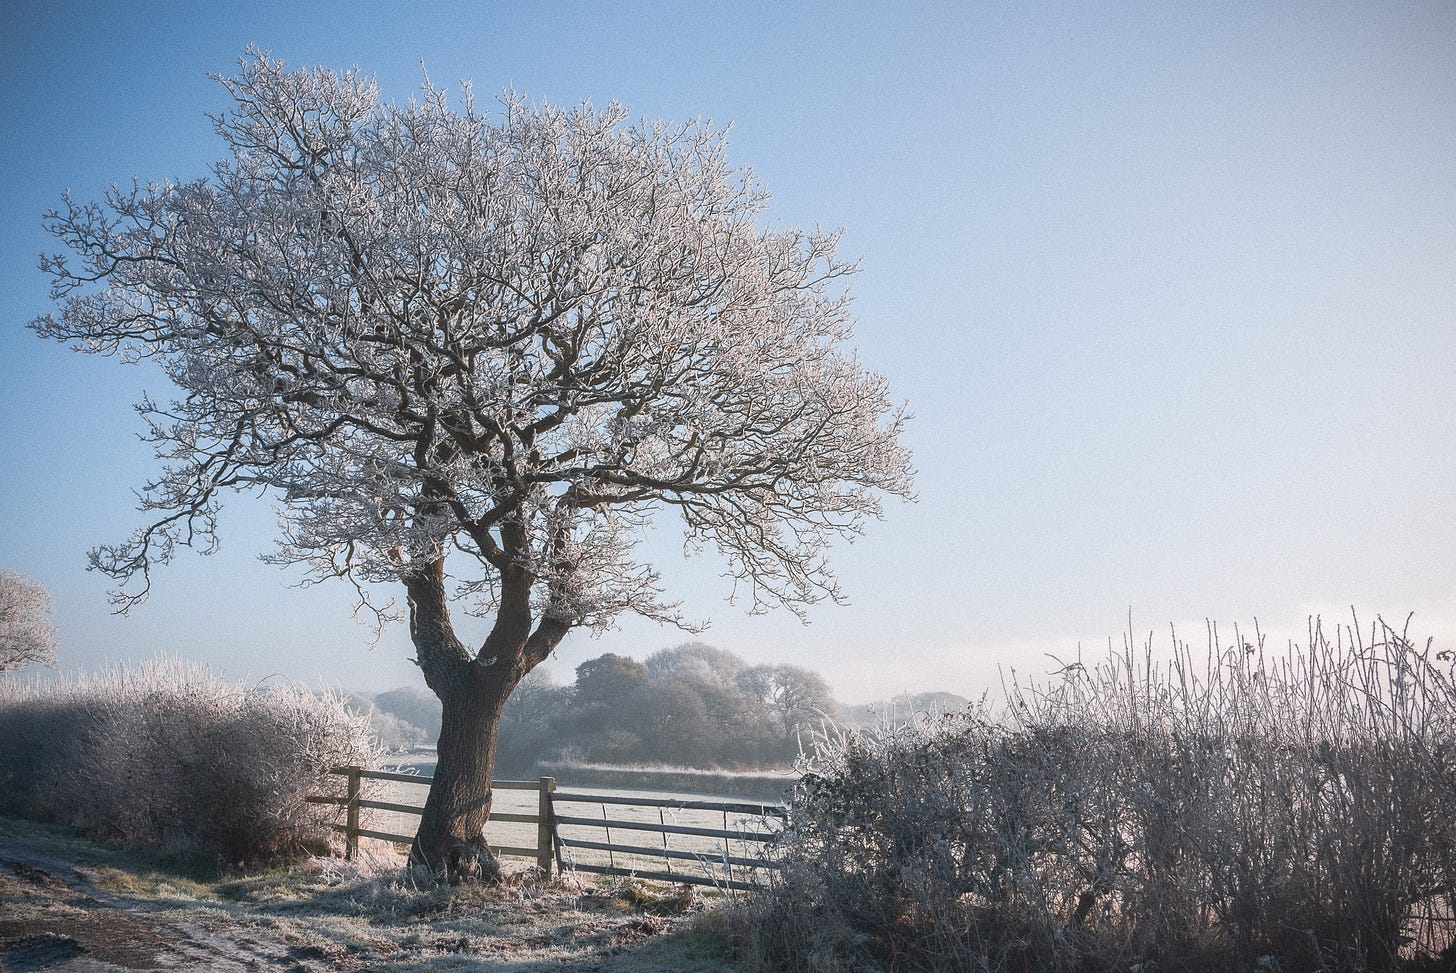 A frost covered tree in winter against a frost covered landscape.